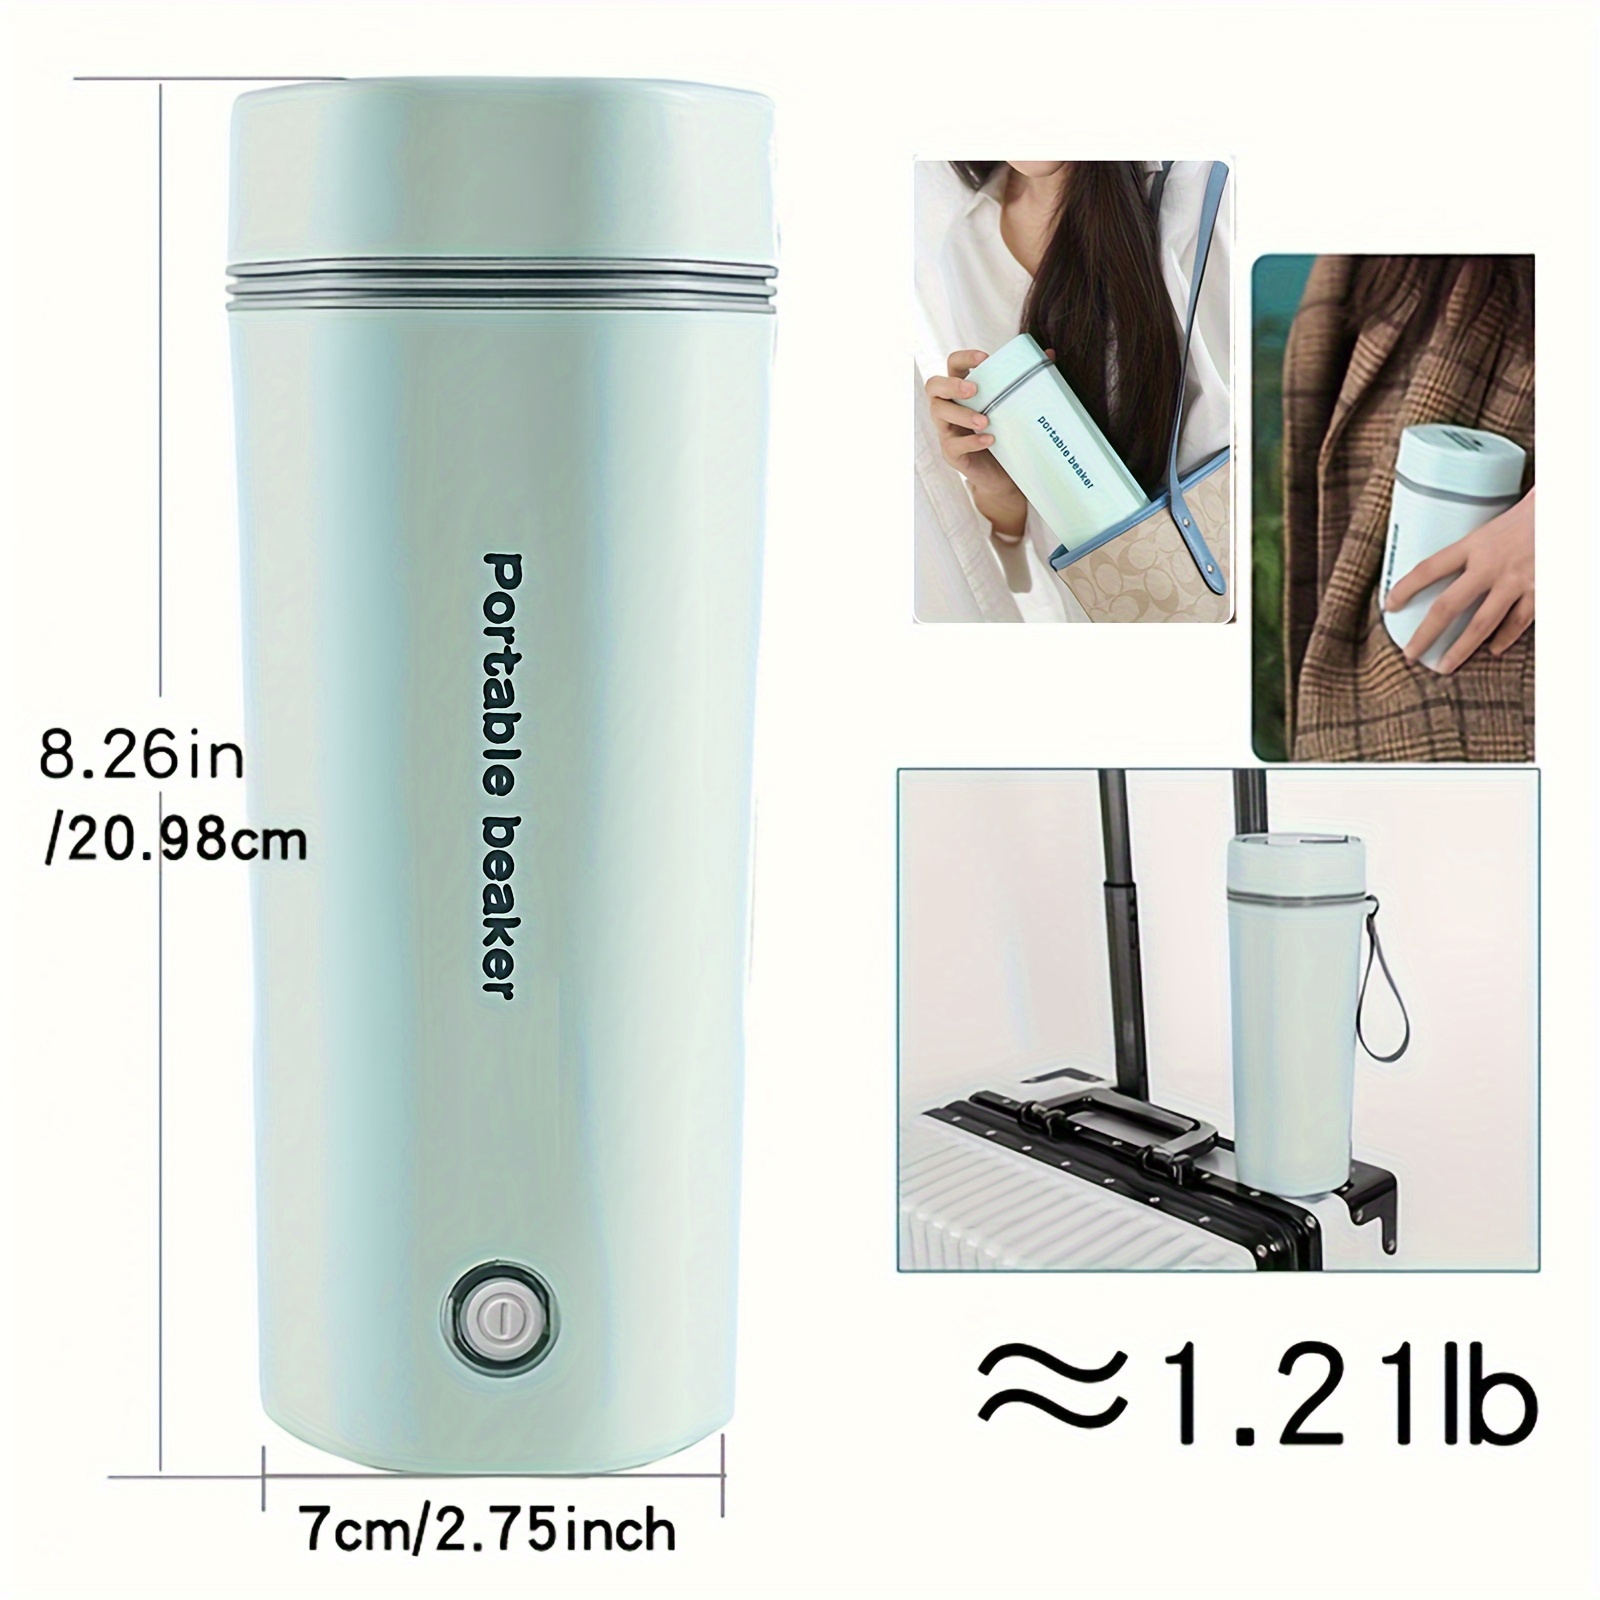 350ml Travel Electric Kettle, Small Stainless Steel Portable